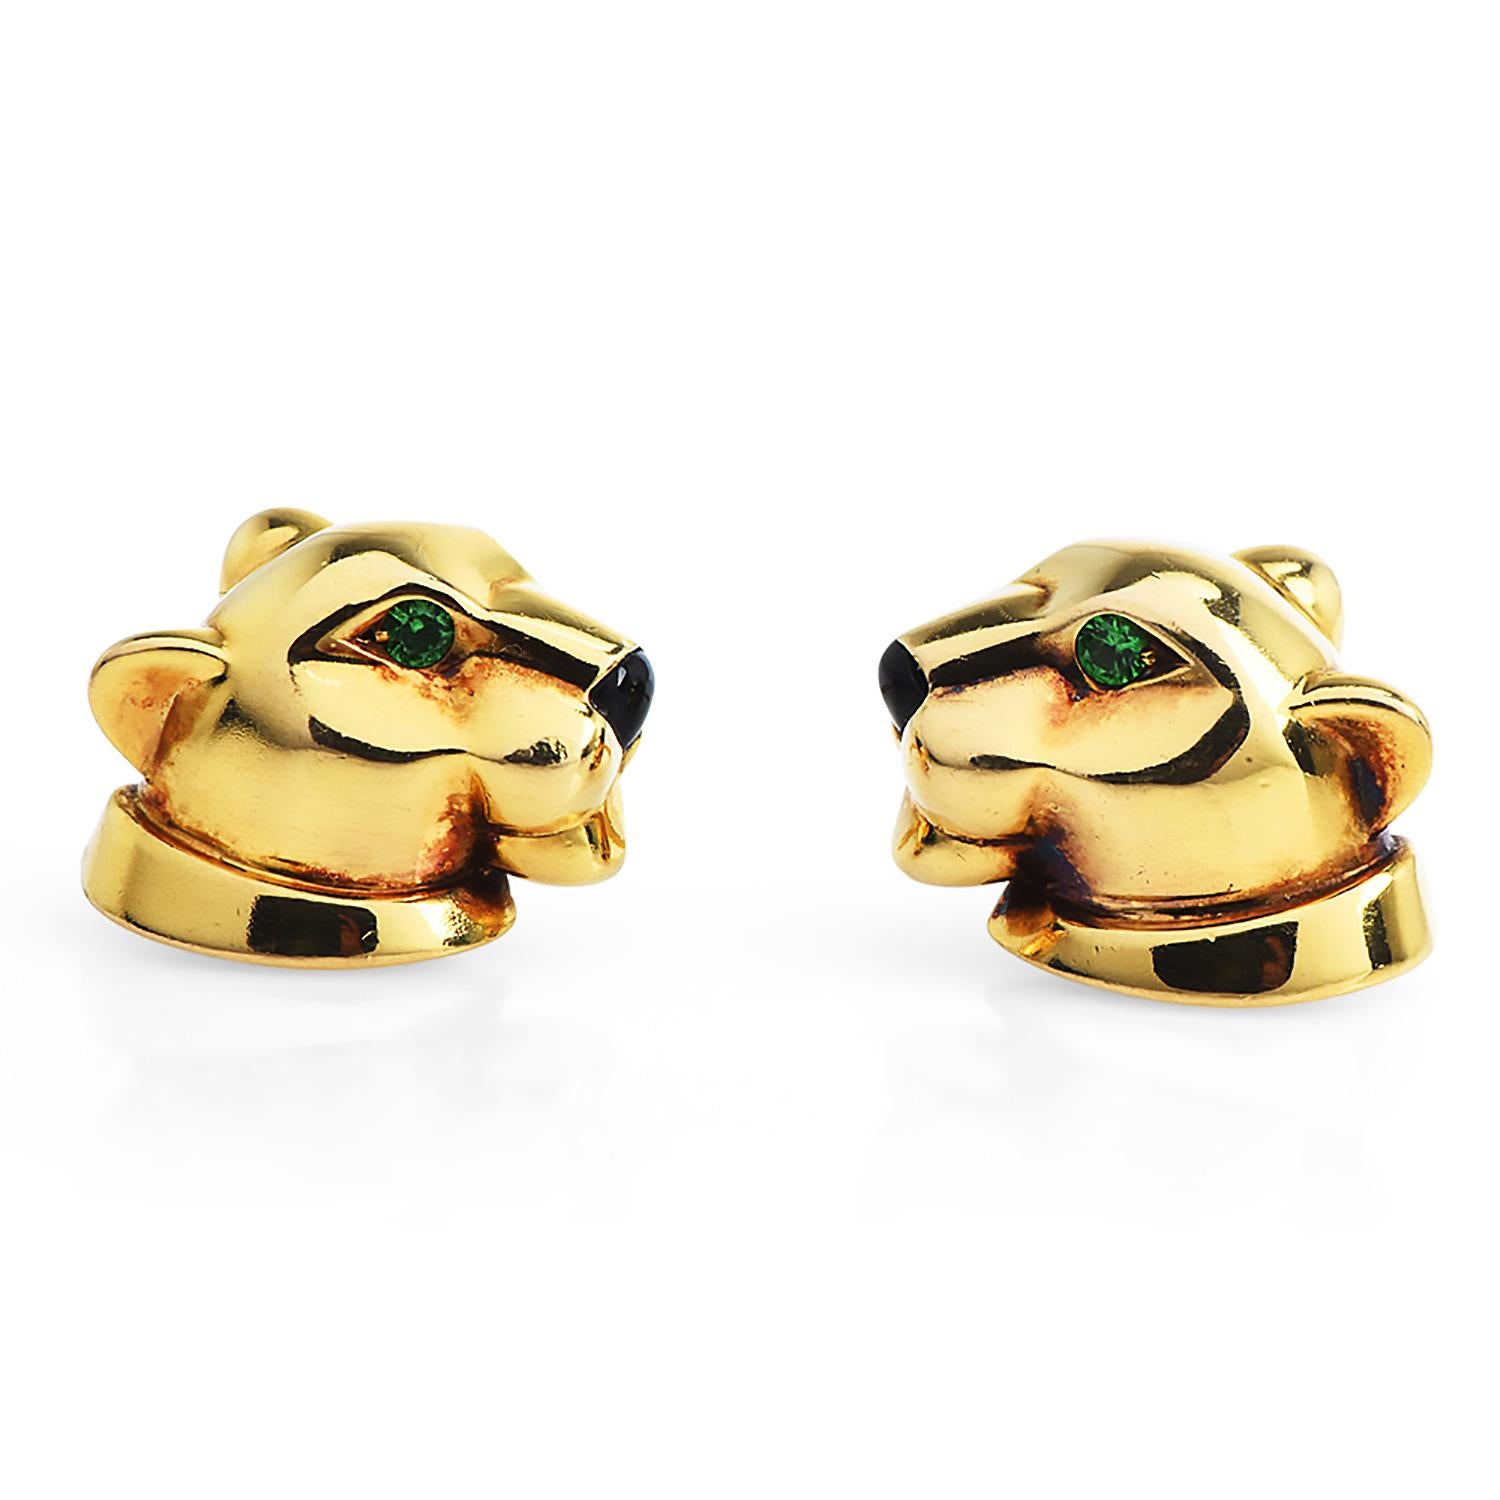 1990's Panthere de Cartier exquisite stud inspired by the classic panther face design.

Crafted in solid 18K Yellow Gold, the eyes are made of 2 Tsavorites , round-cut weighing collectively carats.

The nose is created by two onyx cabochon cut